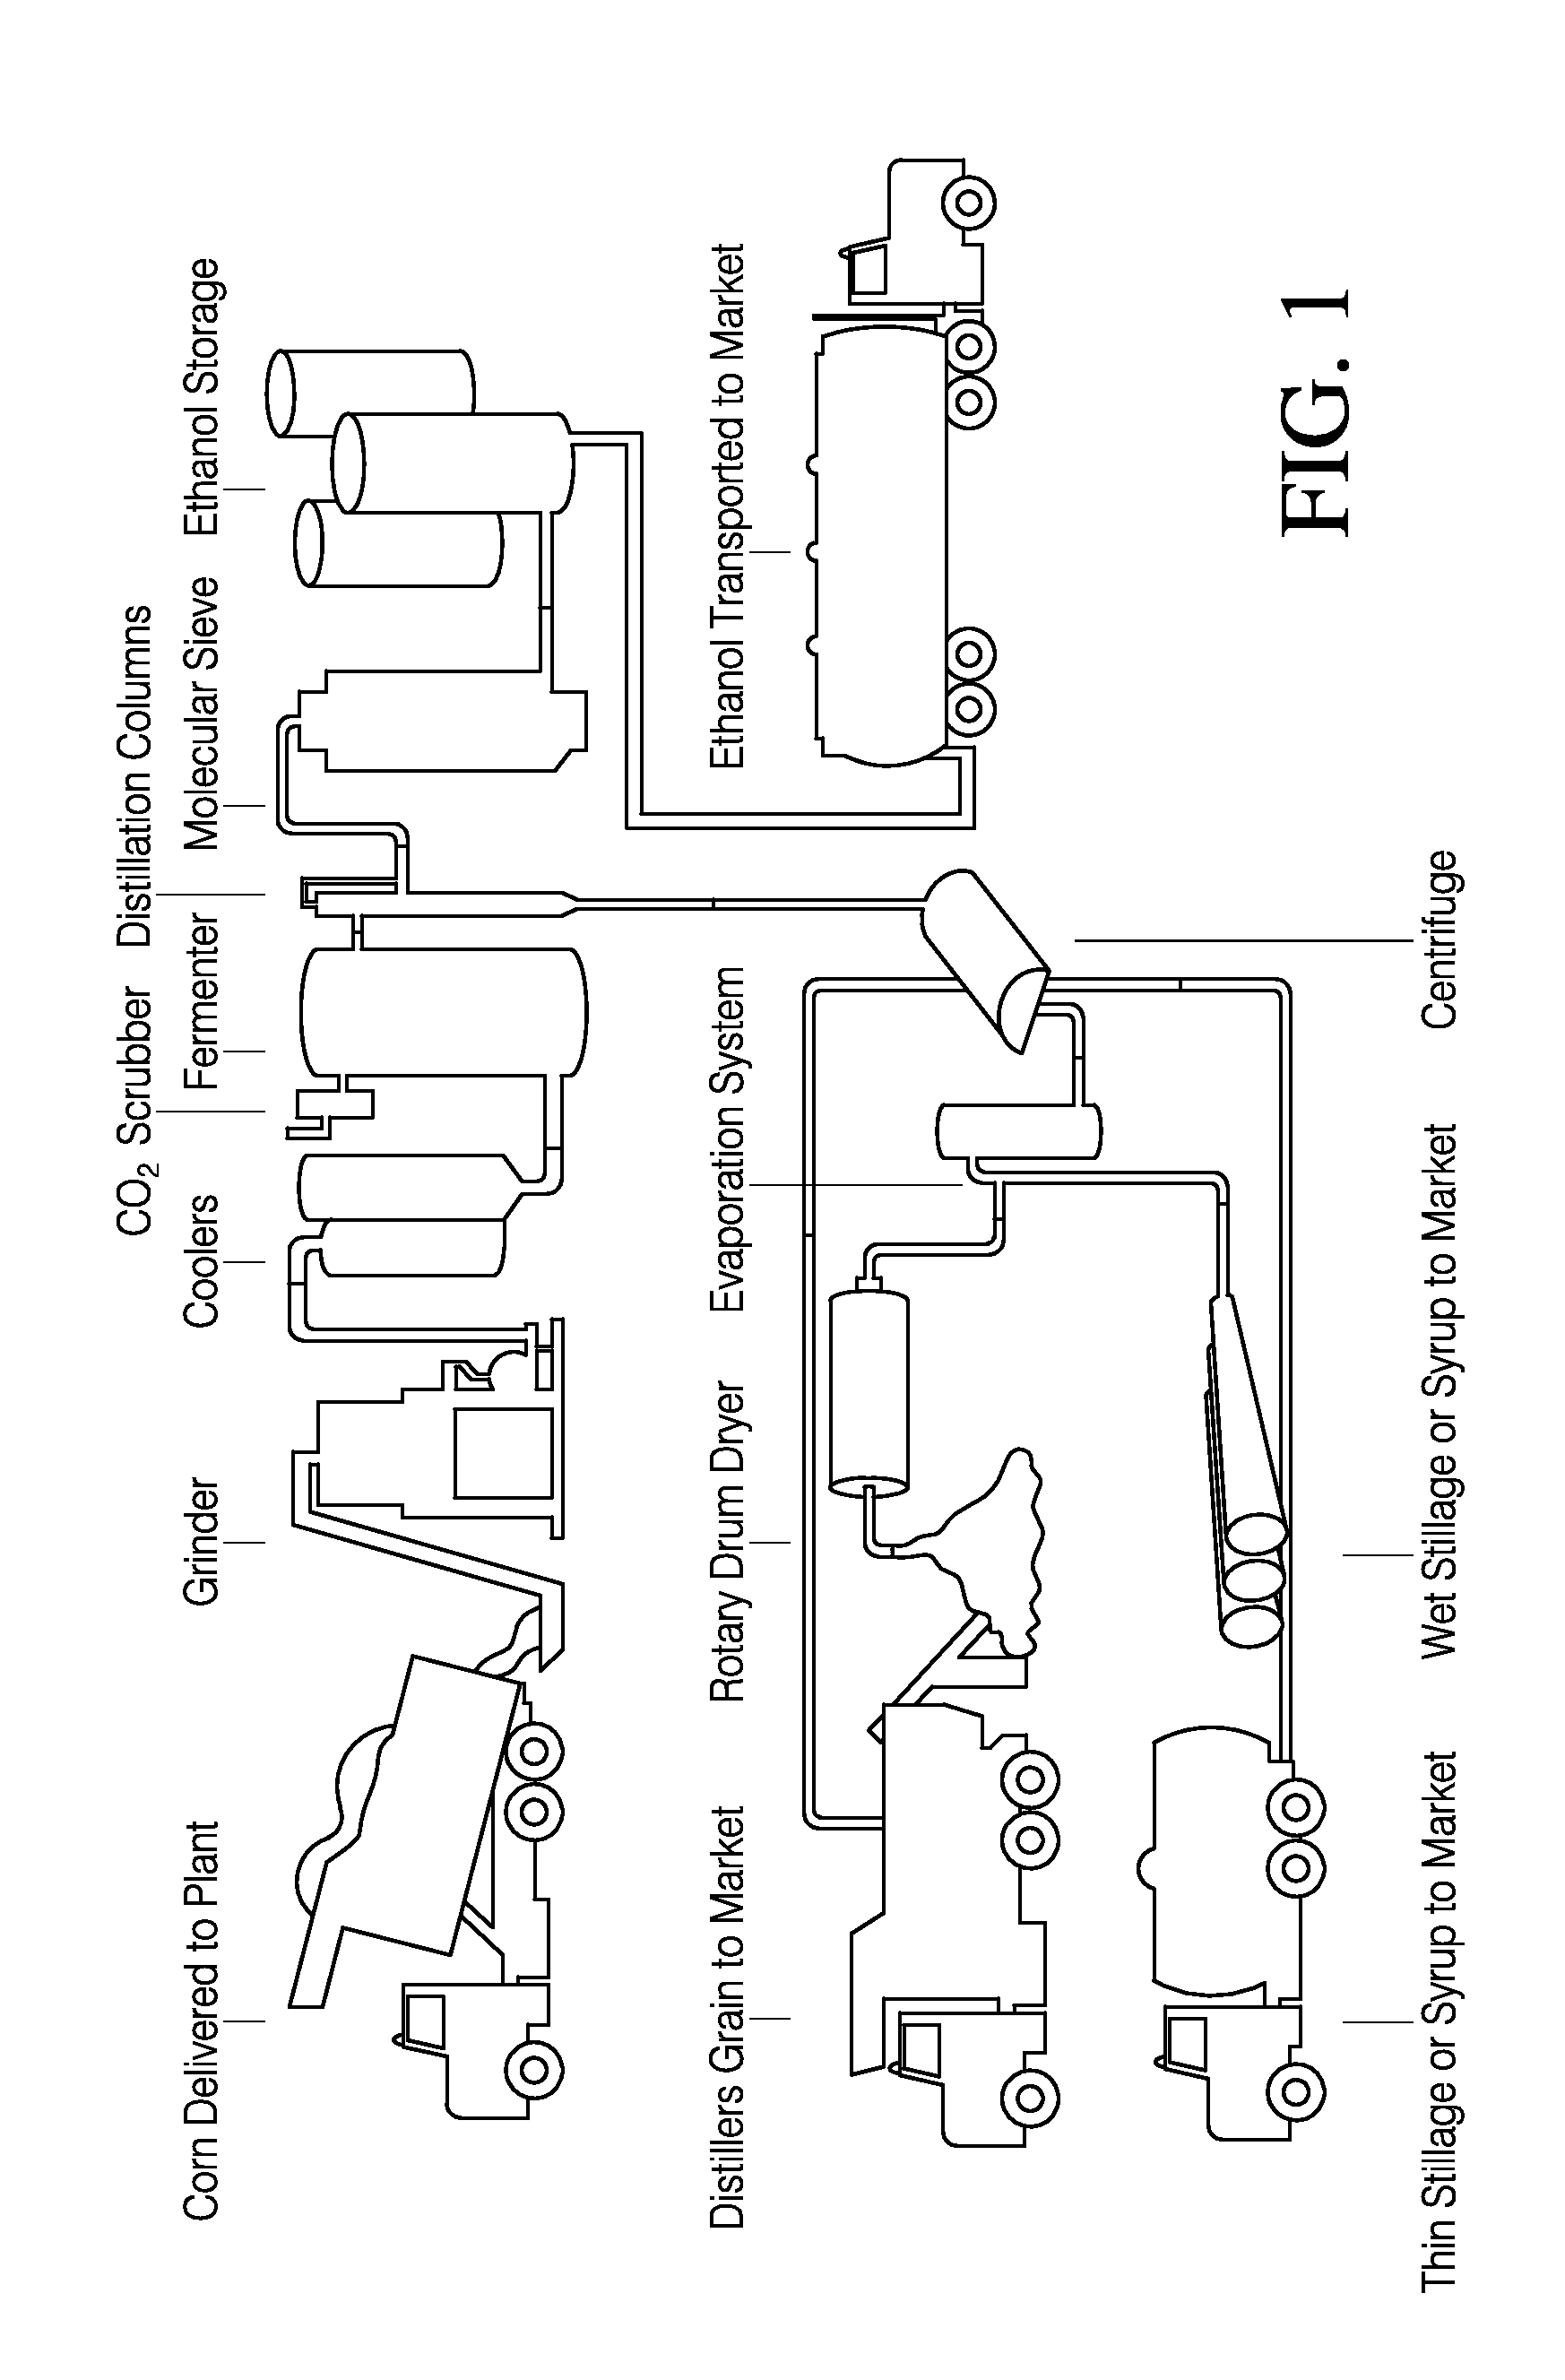 Method of Producing Dried Distillers Grain with Solubles Agglomerated Particles